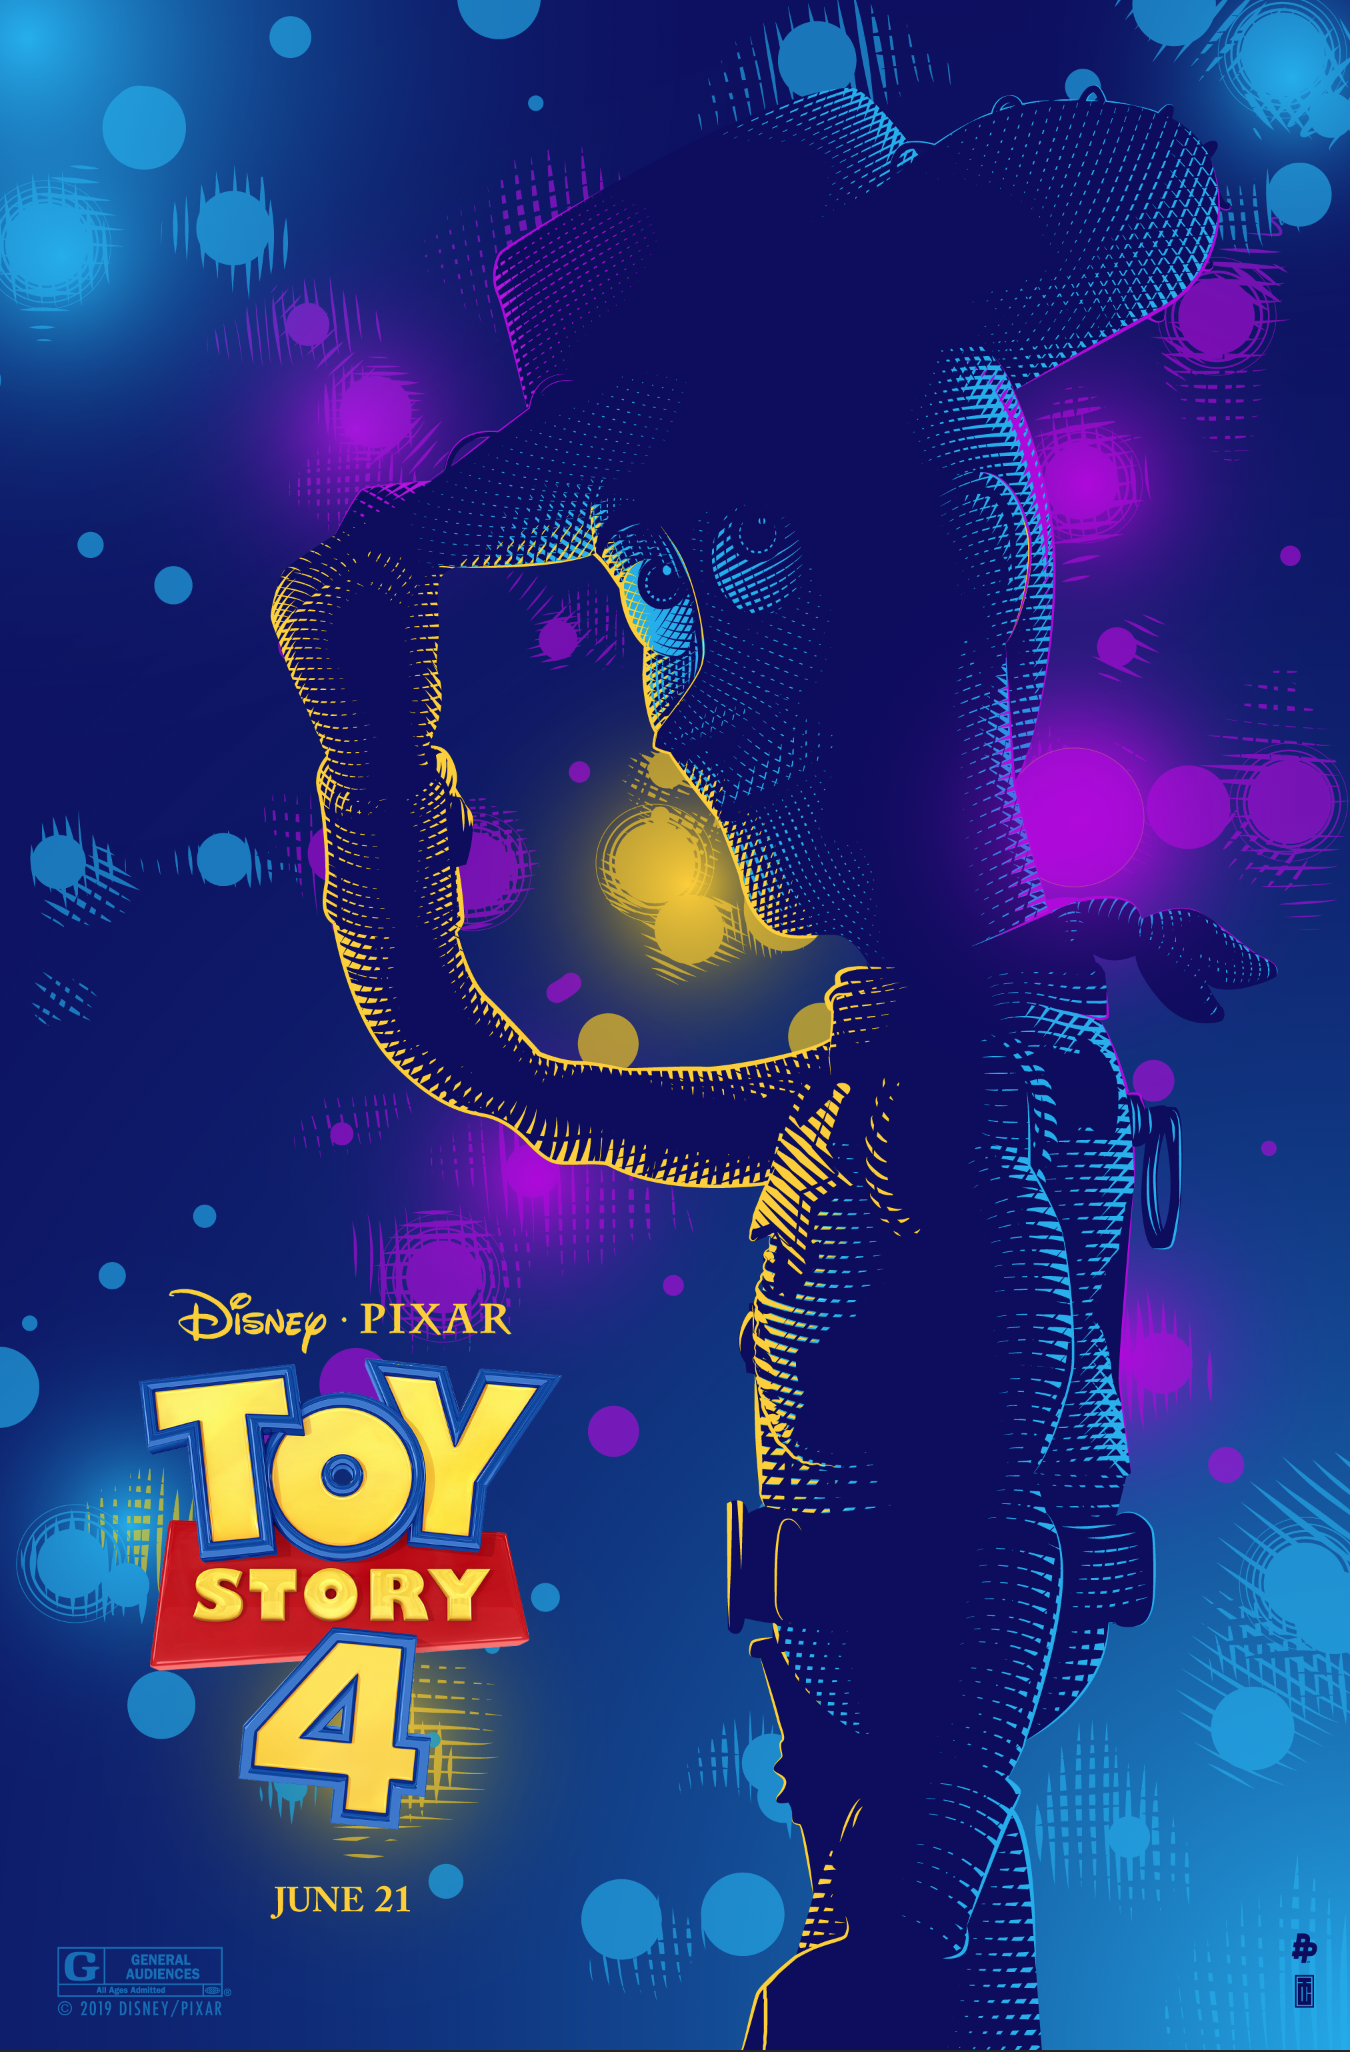 Artwork by Toy Story 4